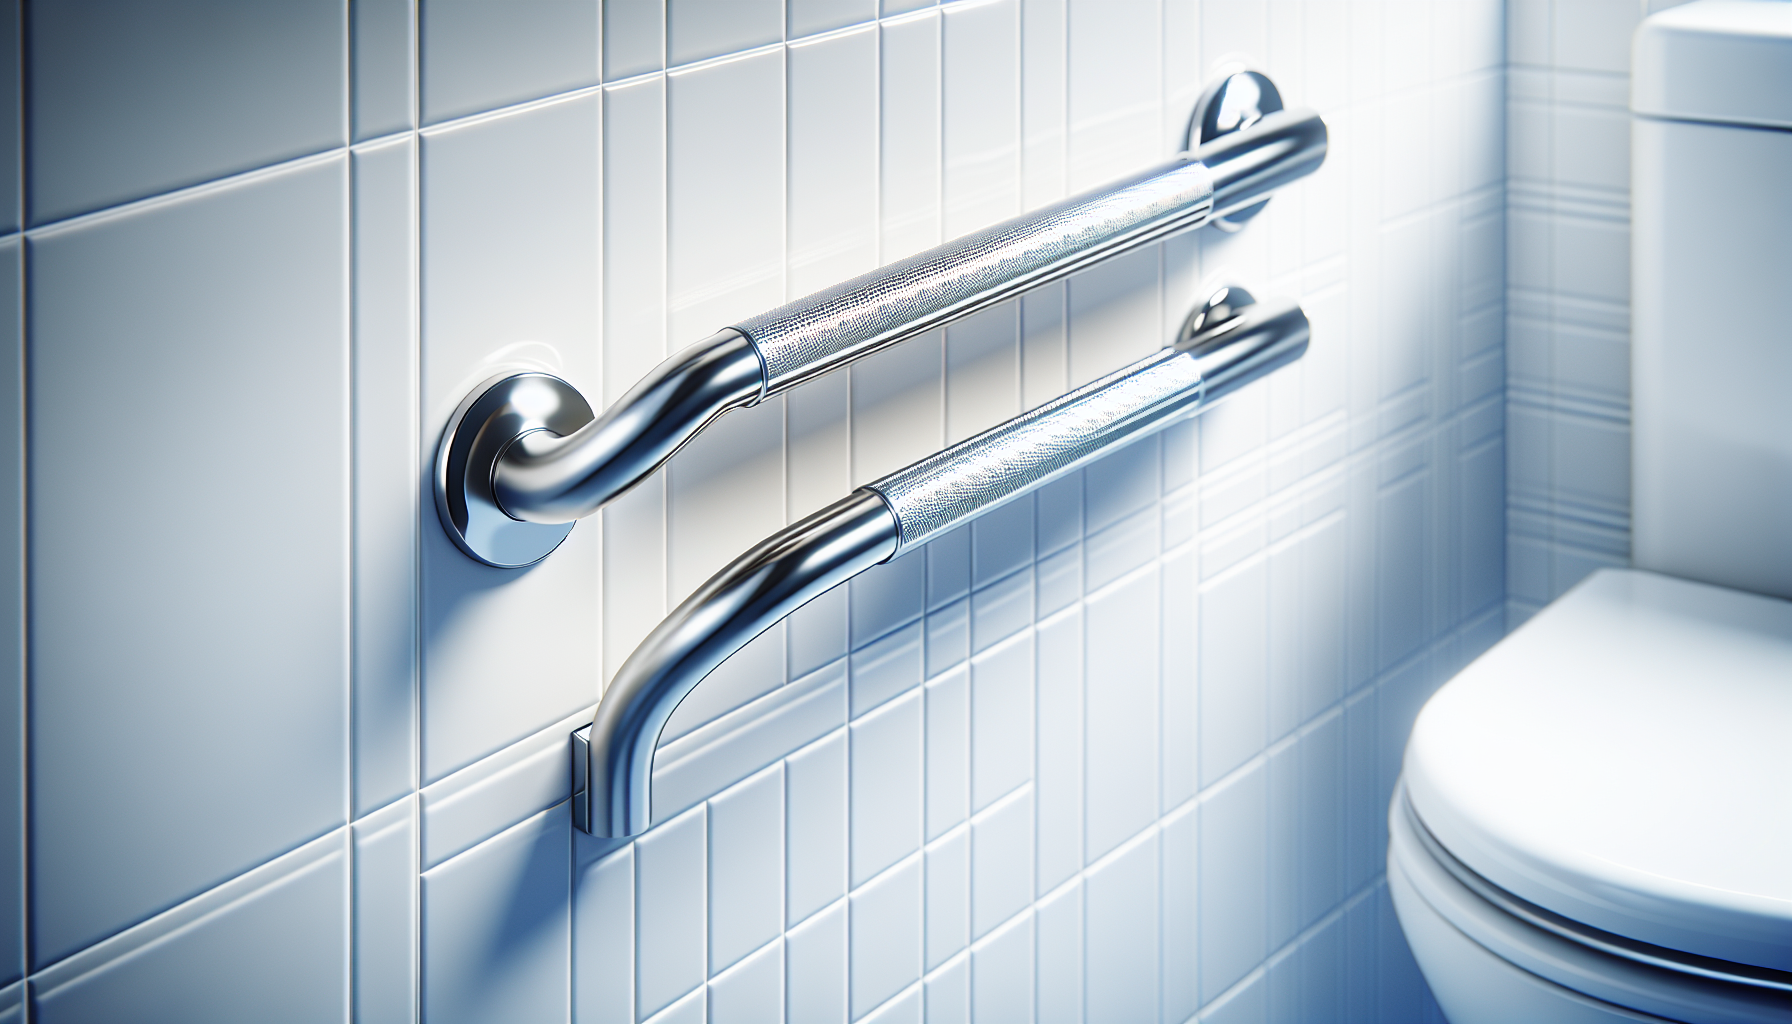 Stainless steel bathroom grab bars with textured grip